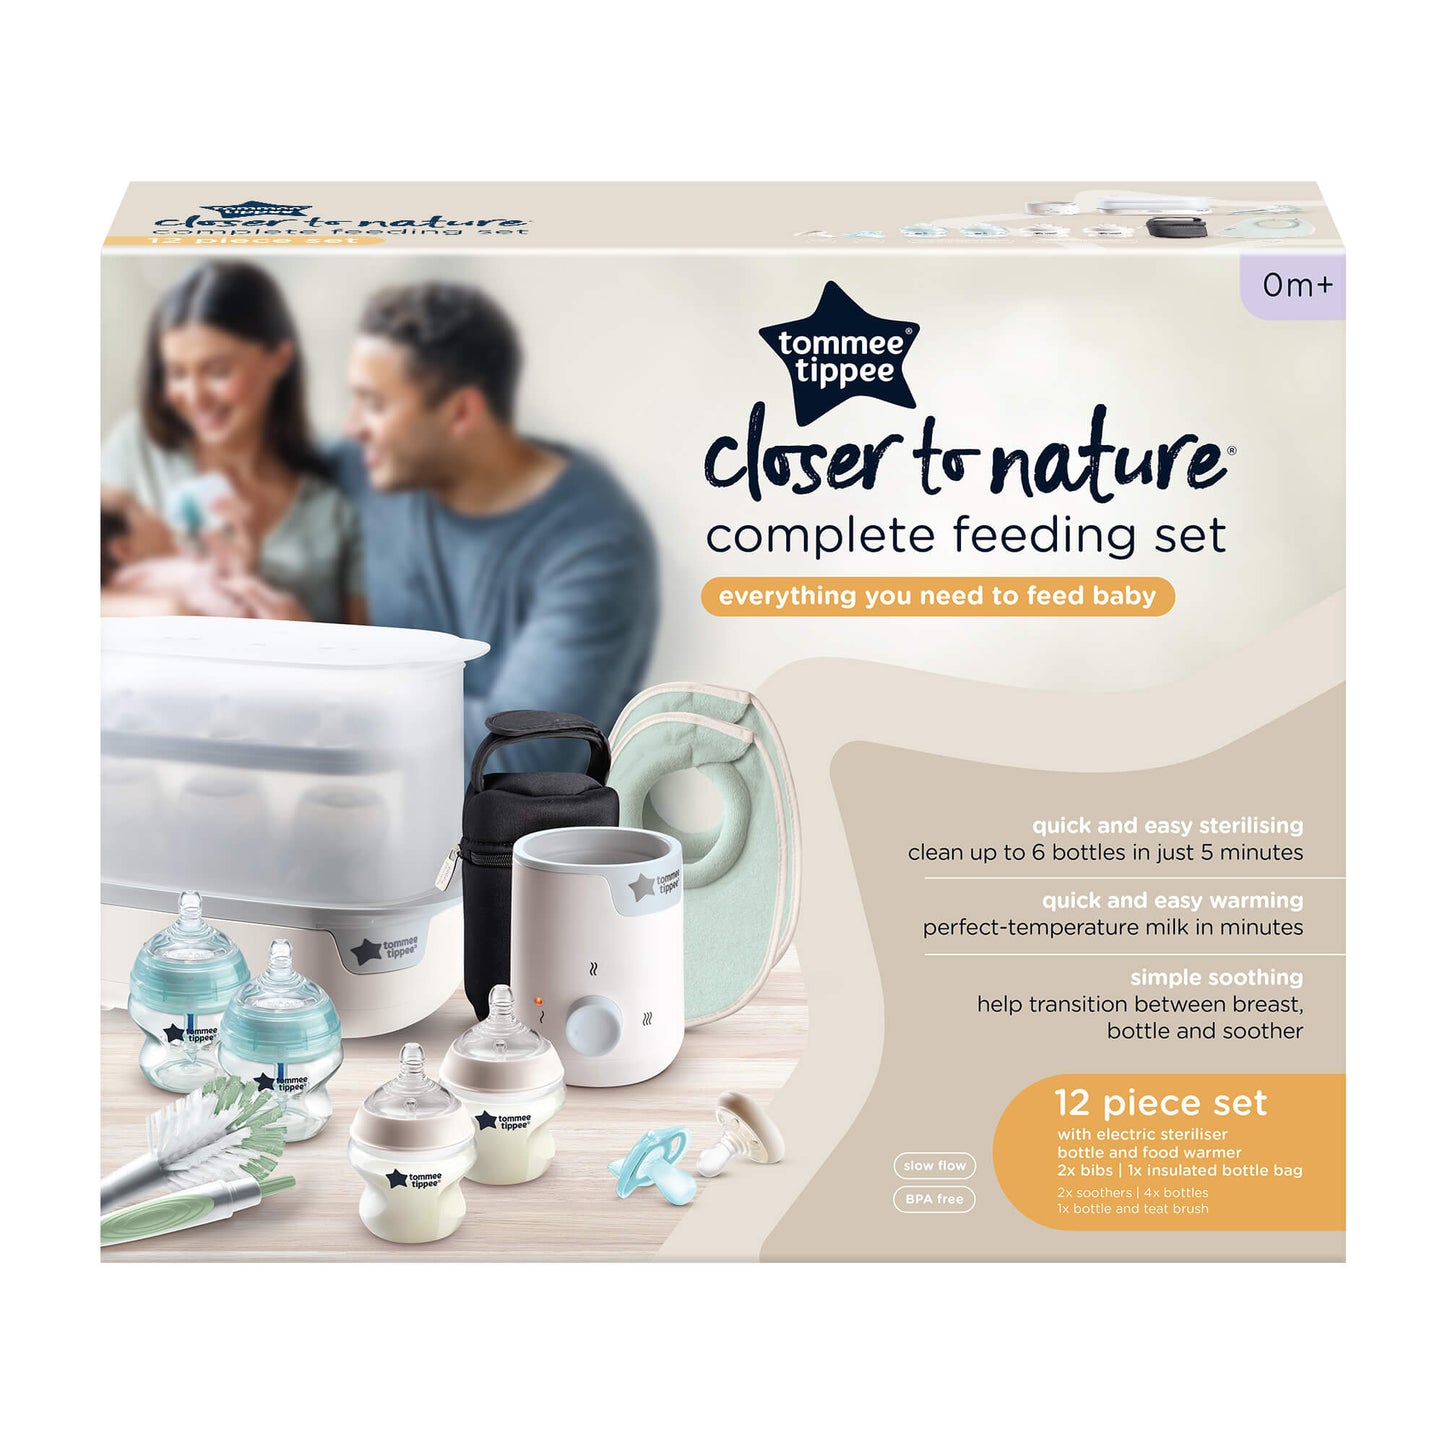 Closer to Nature Complete Feeding Kit